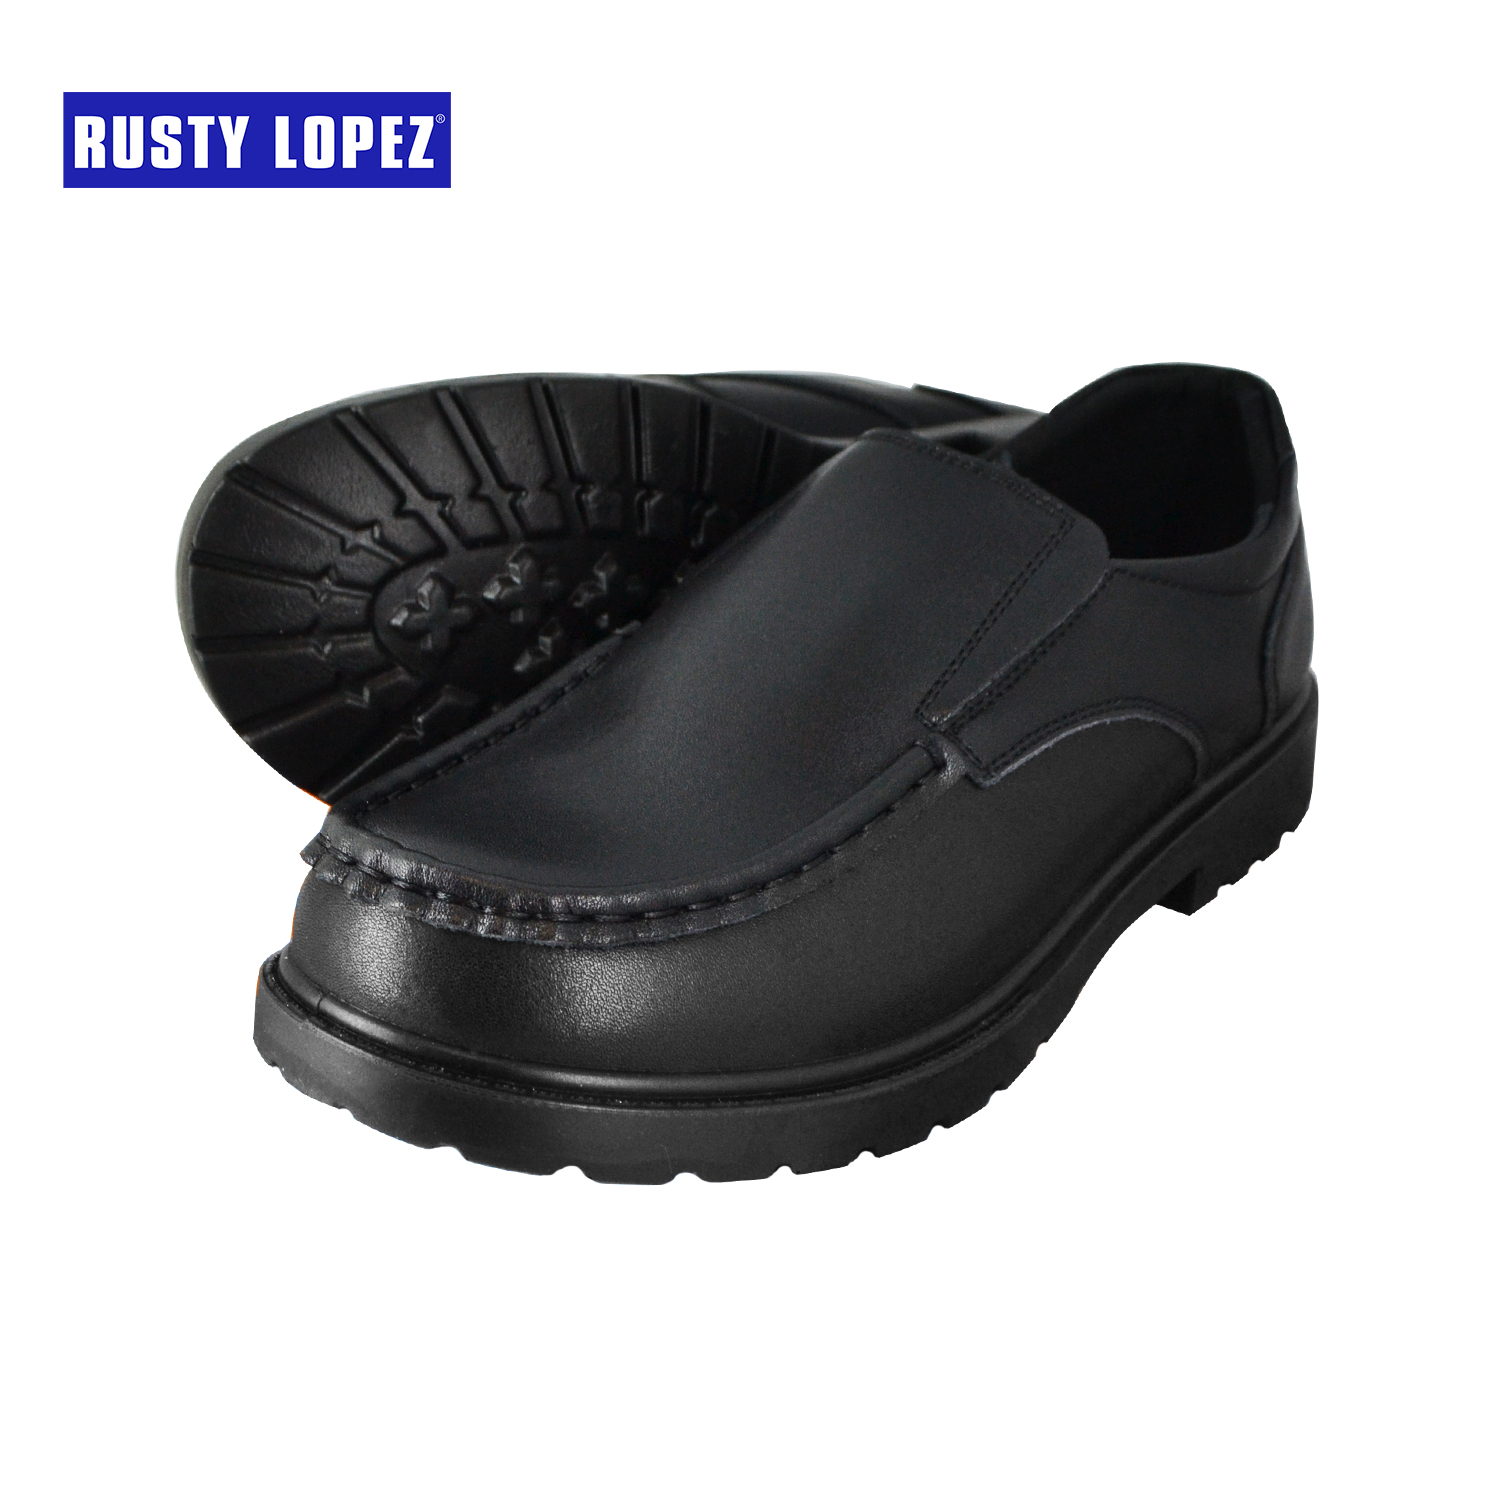 rusty lopez leather shoes